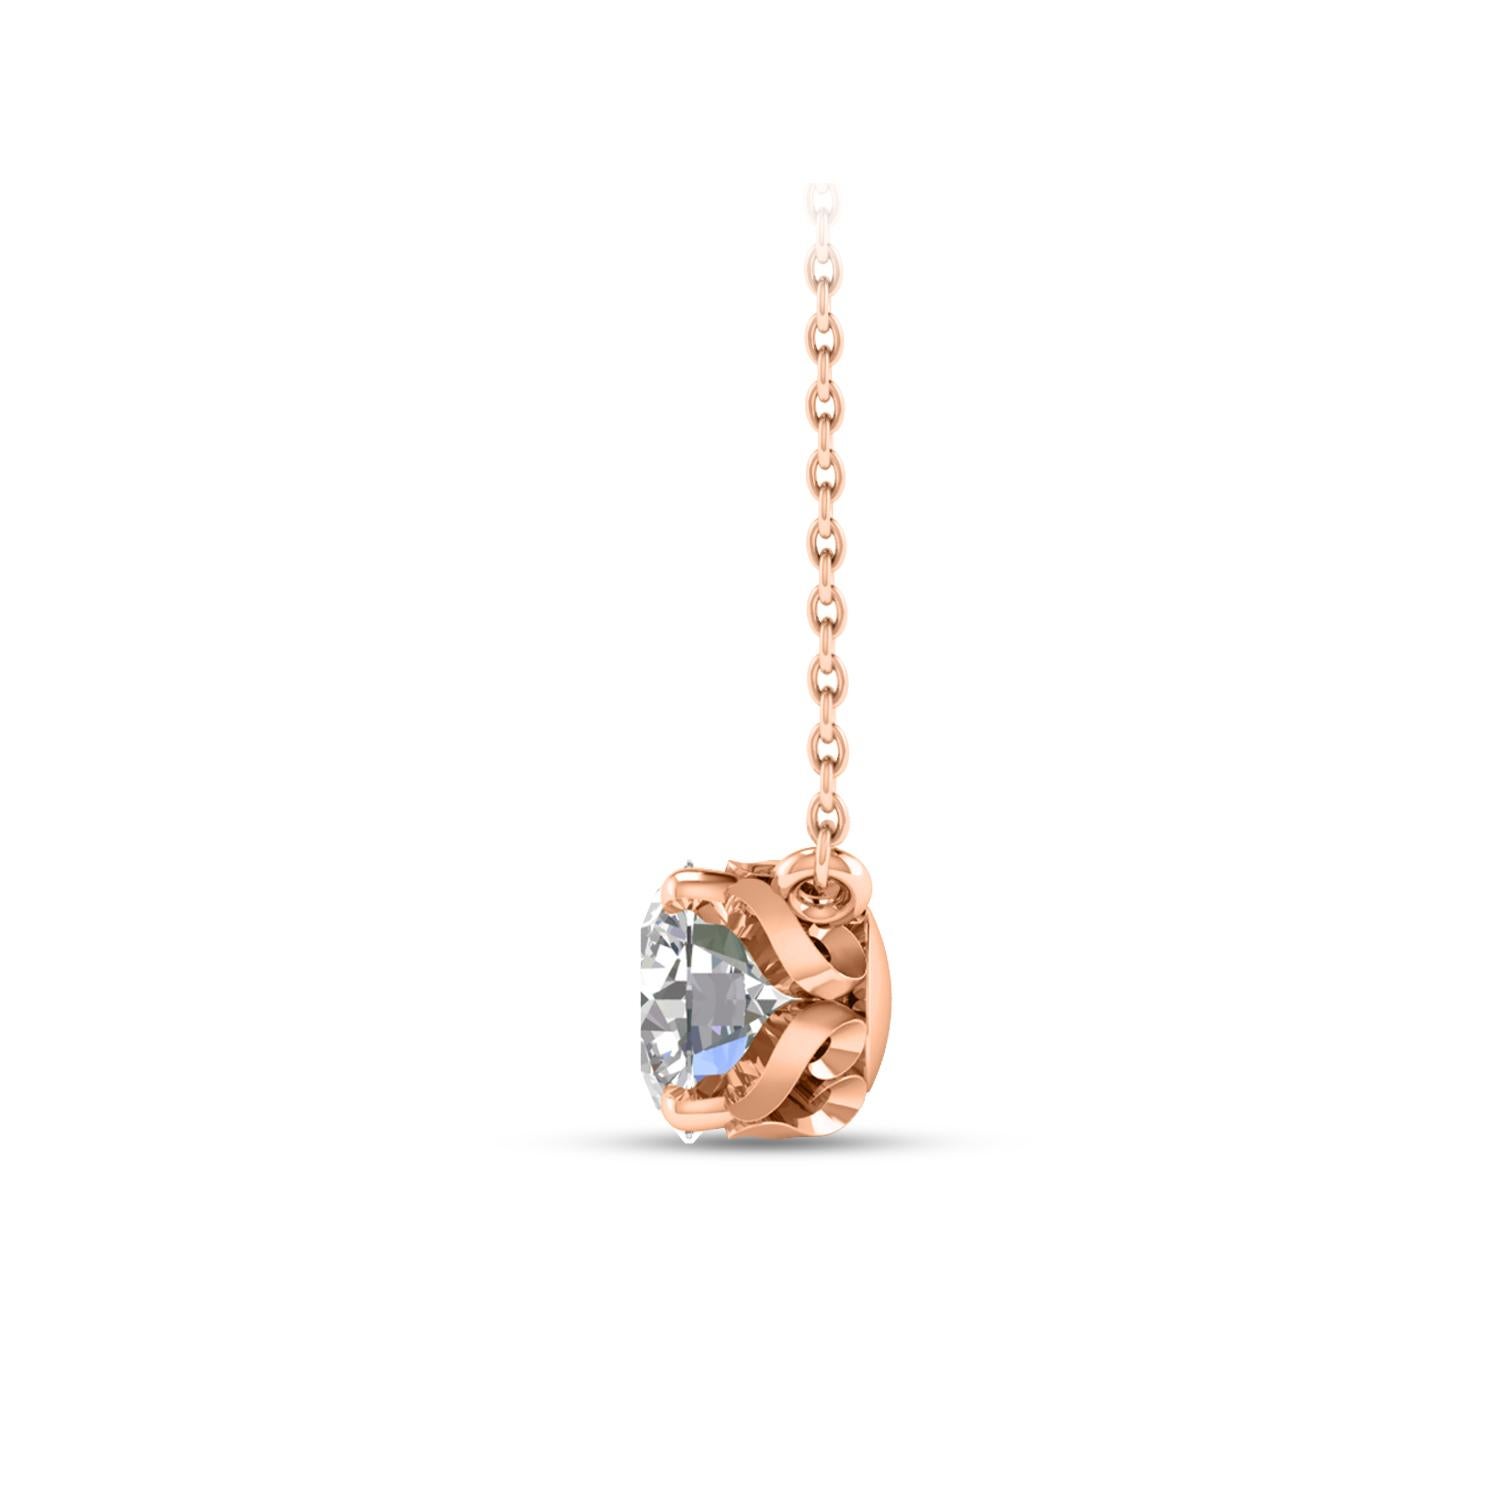  This solitaire diamond necklace features a single, brilliant-cut 0.45 carat diamond in prong setting crafted in 18 KT rose gold. This elegant necklace includes 20-inch cable chain with extender at 18-inch. 

(Carat weights may vary slightly due to